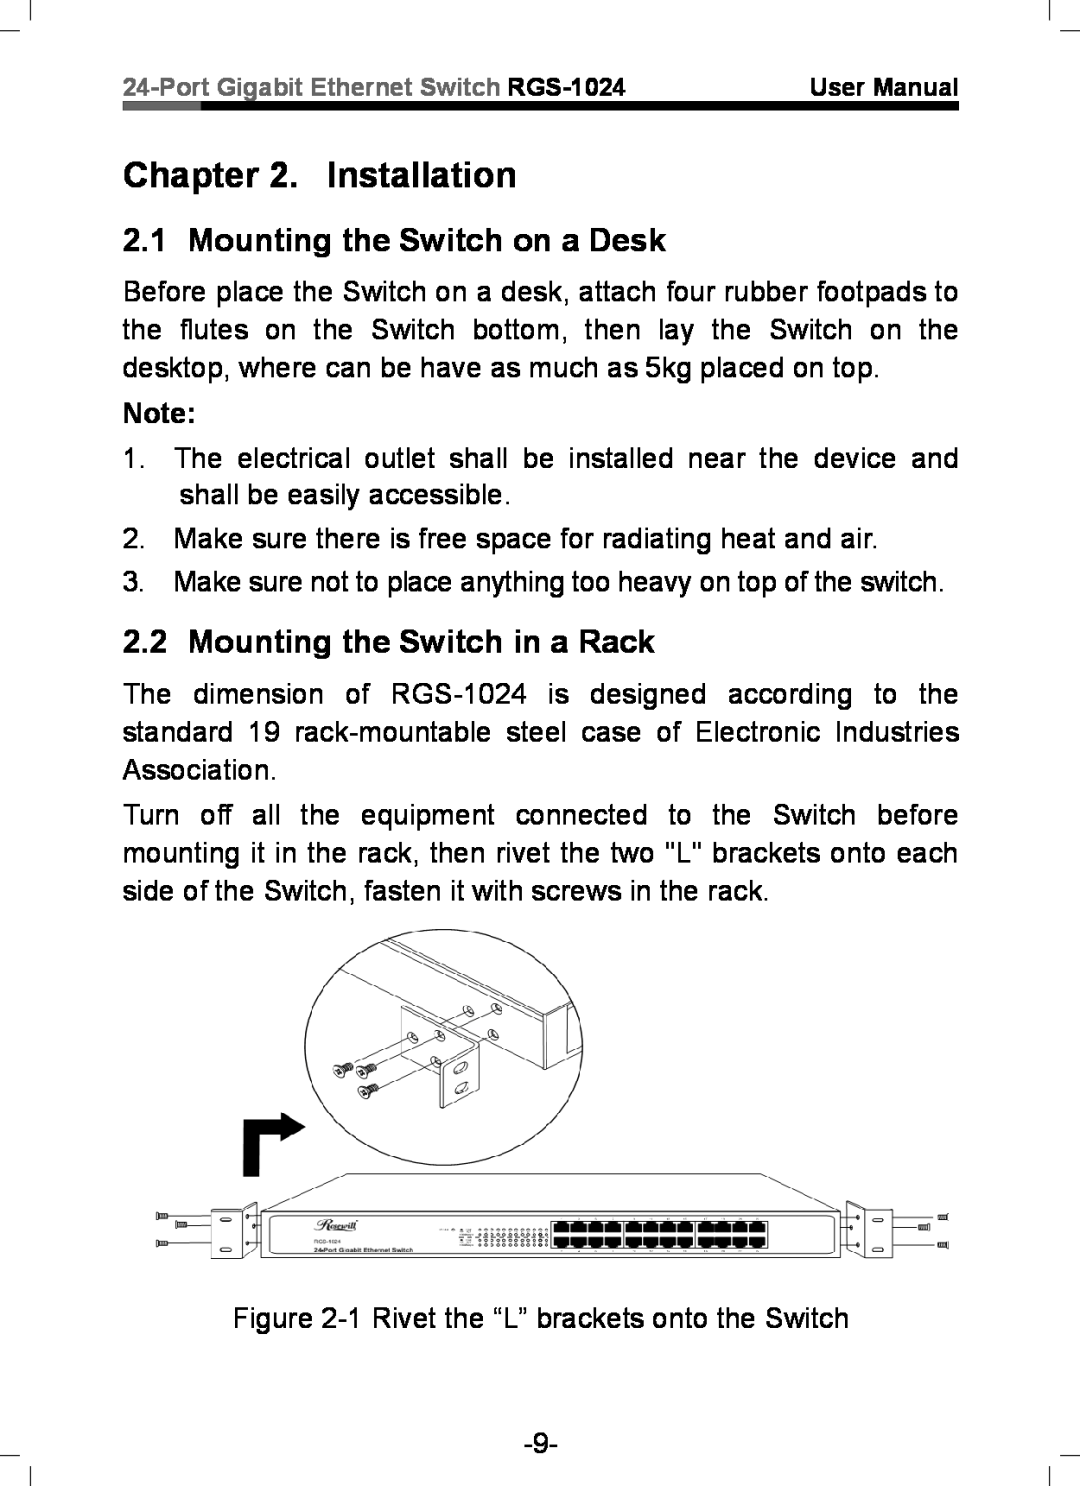 Rosewill RGS-1024 user manual Installation, Mounting the Switch on a Desk, Mounting the Switch in a Rack 